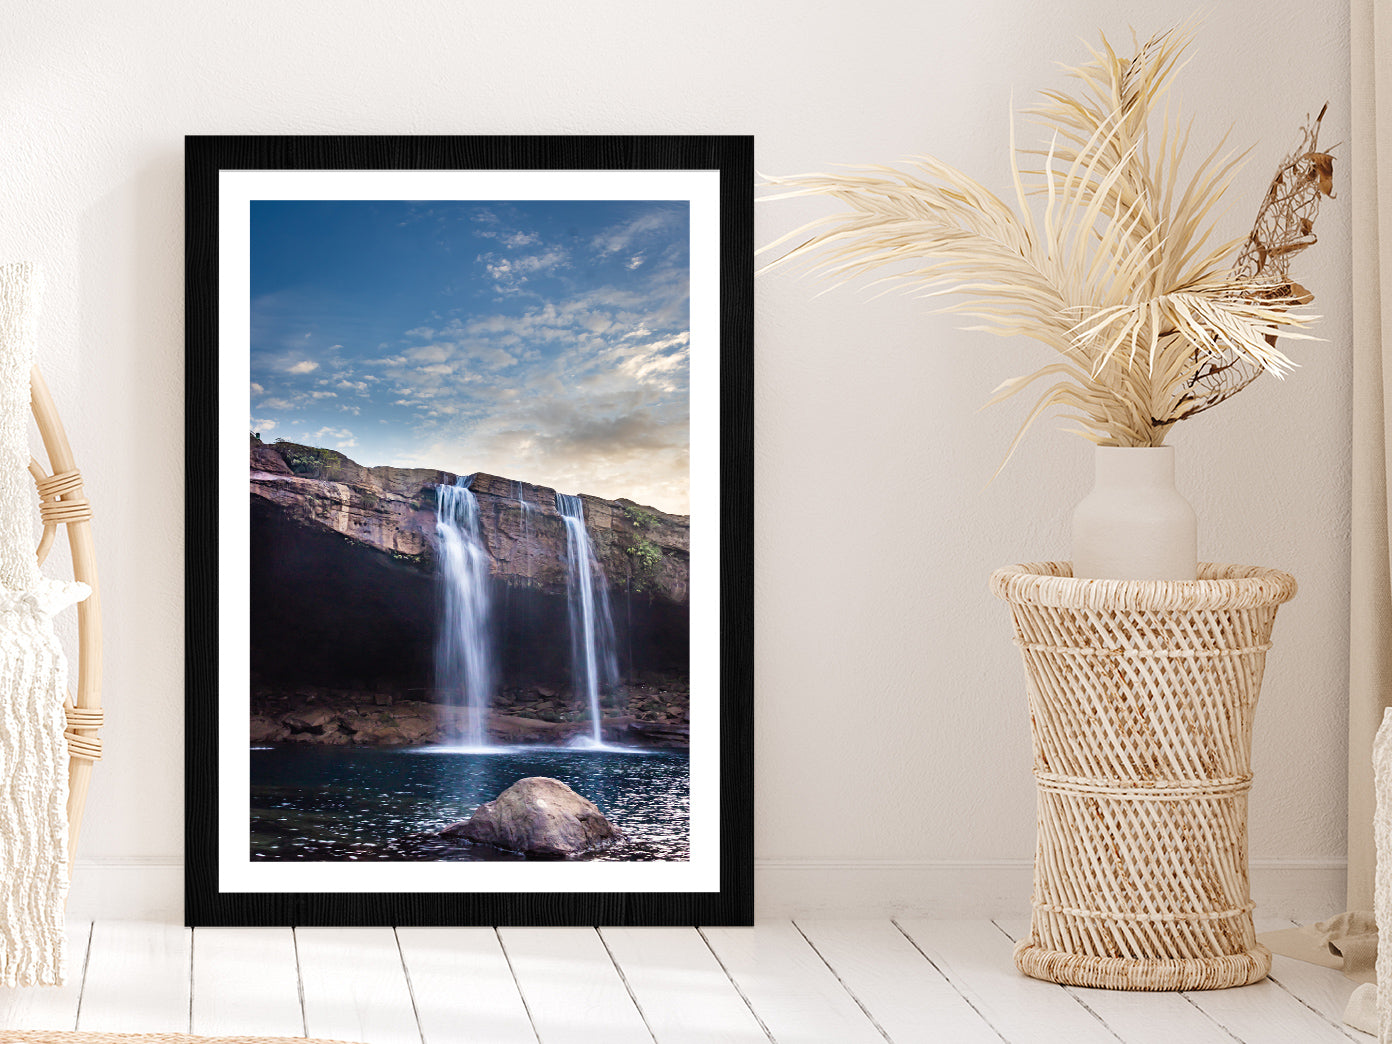 Waterfall Falling From Mountain Glass Framed Wall Art, Ready to Hang Quality Print With White Border Black